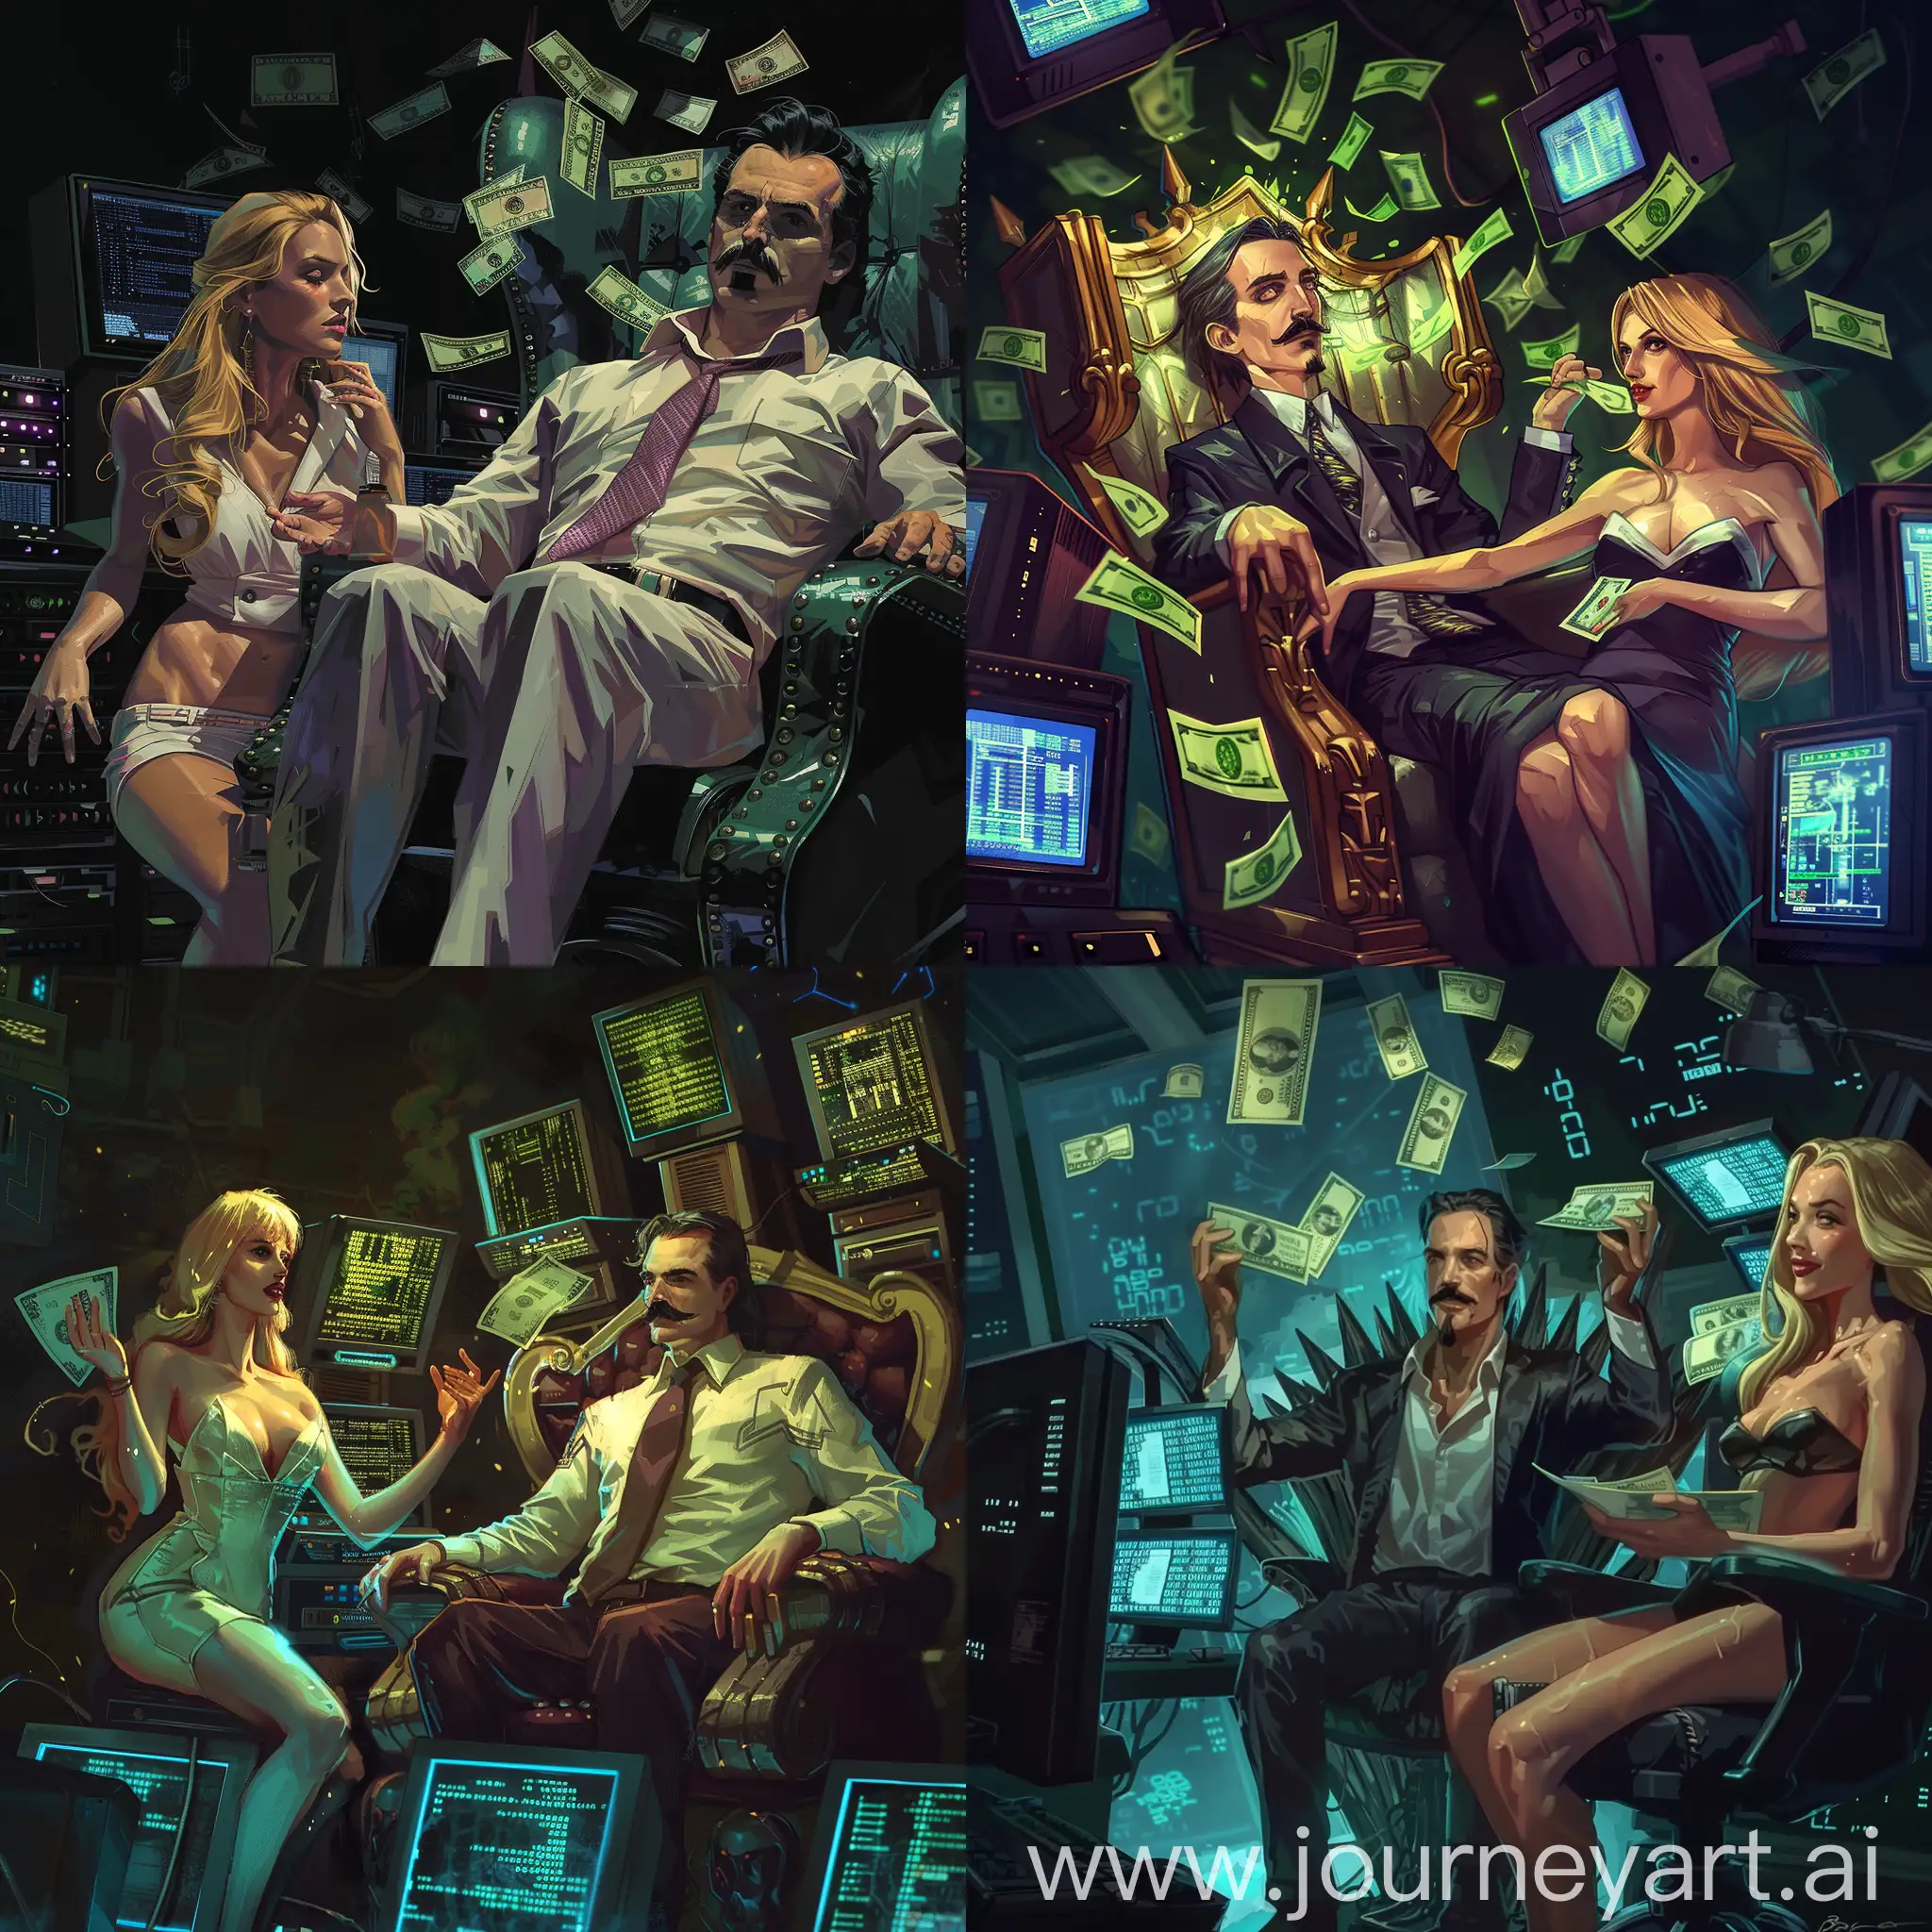 Nikola Tesla became an IT specialist. He sits on a throne among computers and throws money around. The computers show the program code. There is a gorgeous blonde girl standing next to me. Dark background. In a painted style